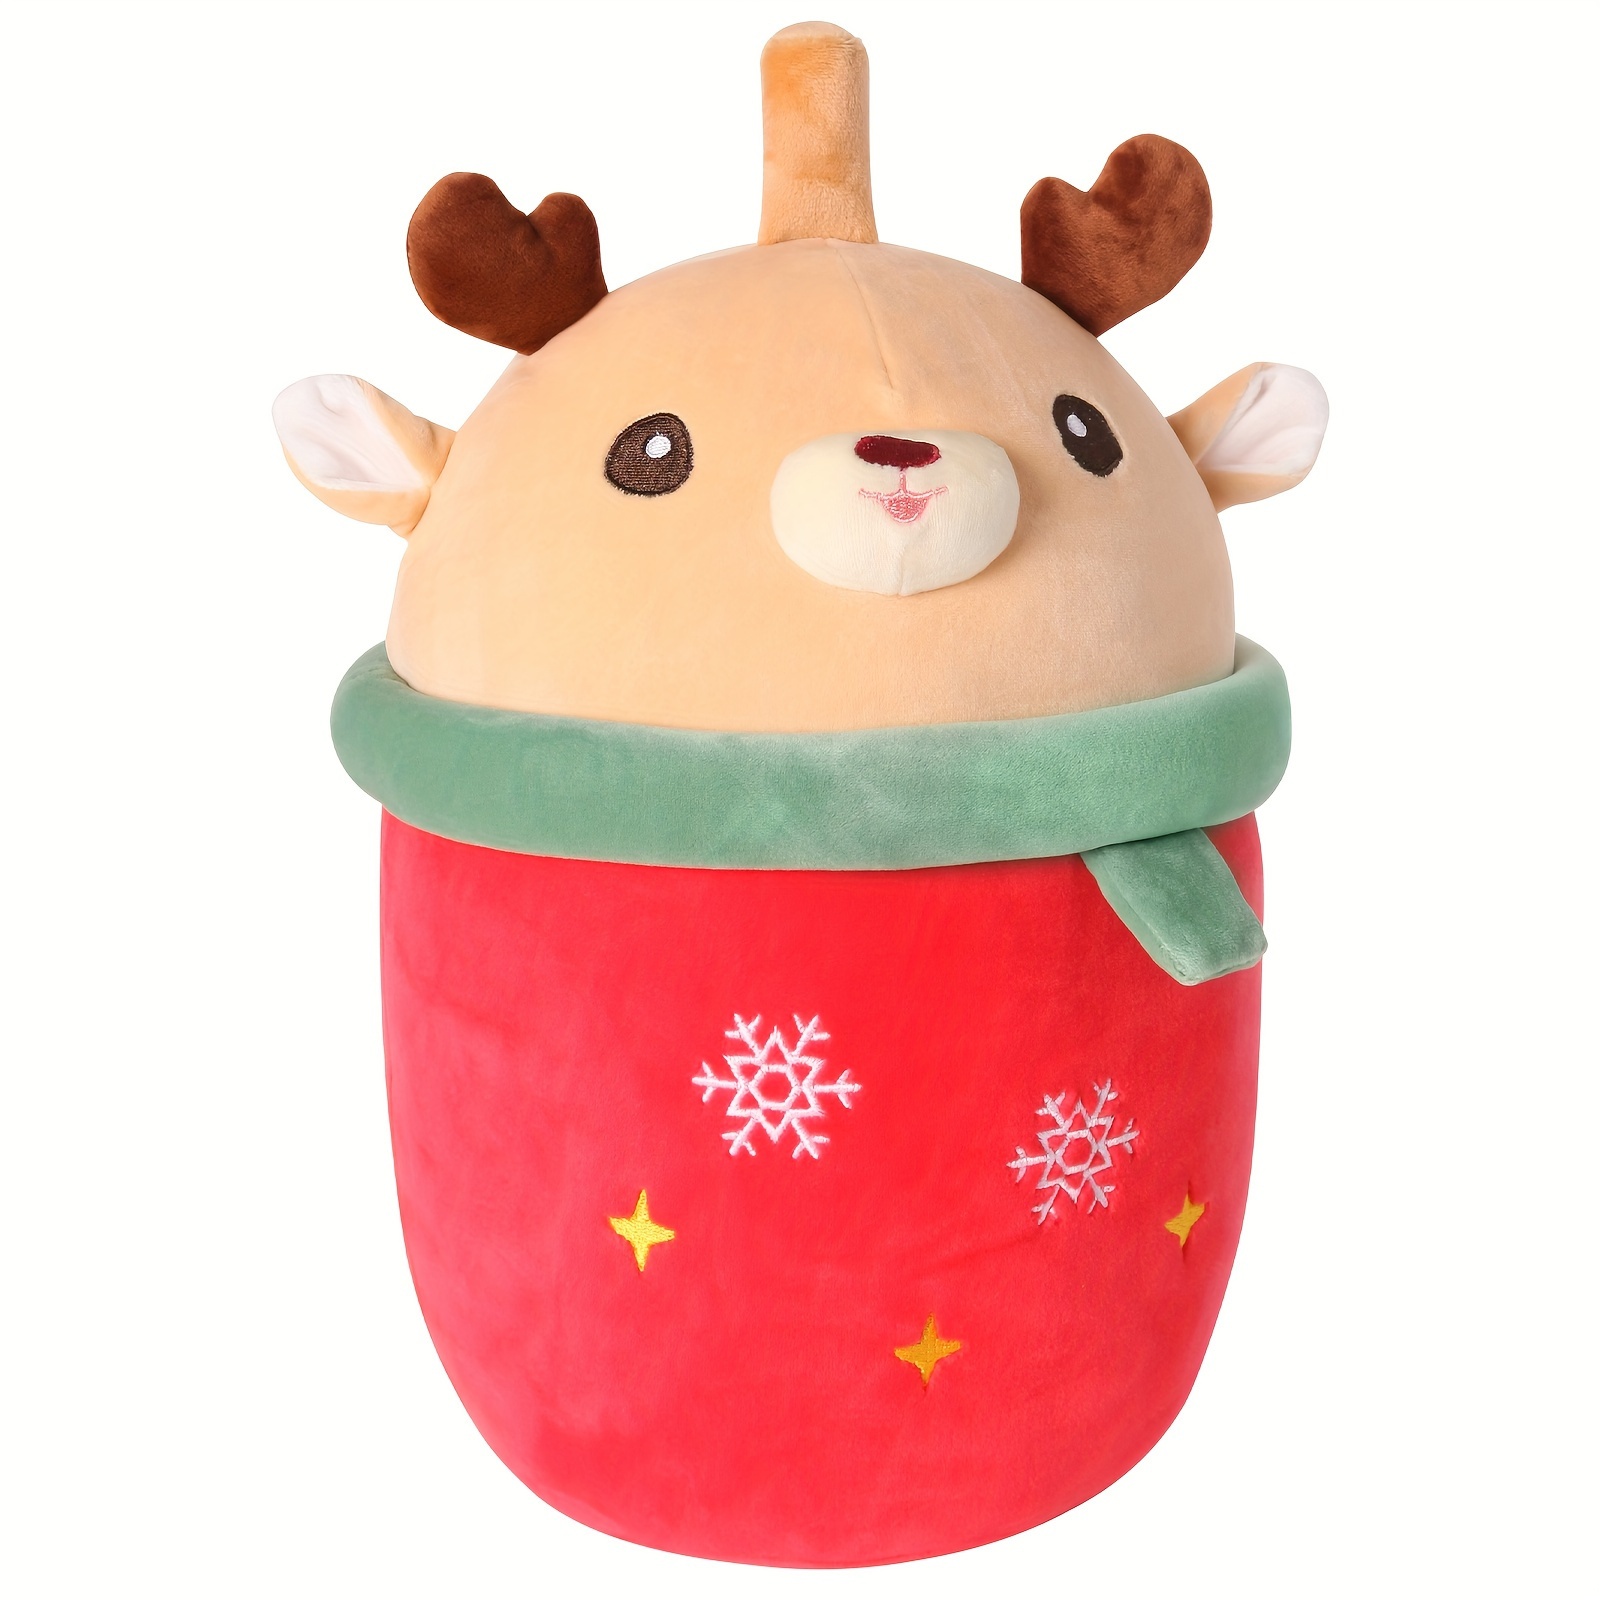 

14 Inch Cute Deer With Green Scarf, Boba Bubble Tea Plush Soft Pillow Plushies, Large Deer Milk Tea Stuffed Animals Toy, Gifts For Girls Kids Birthday